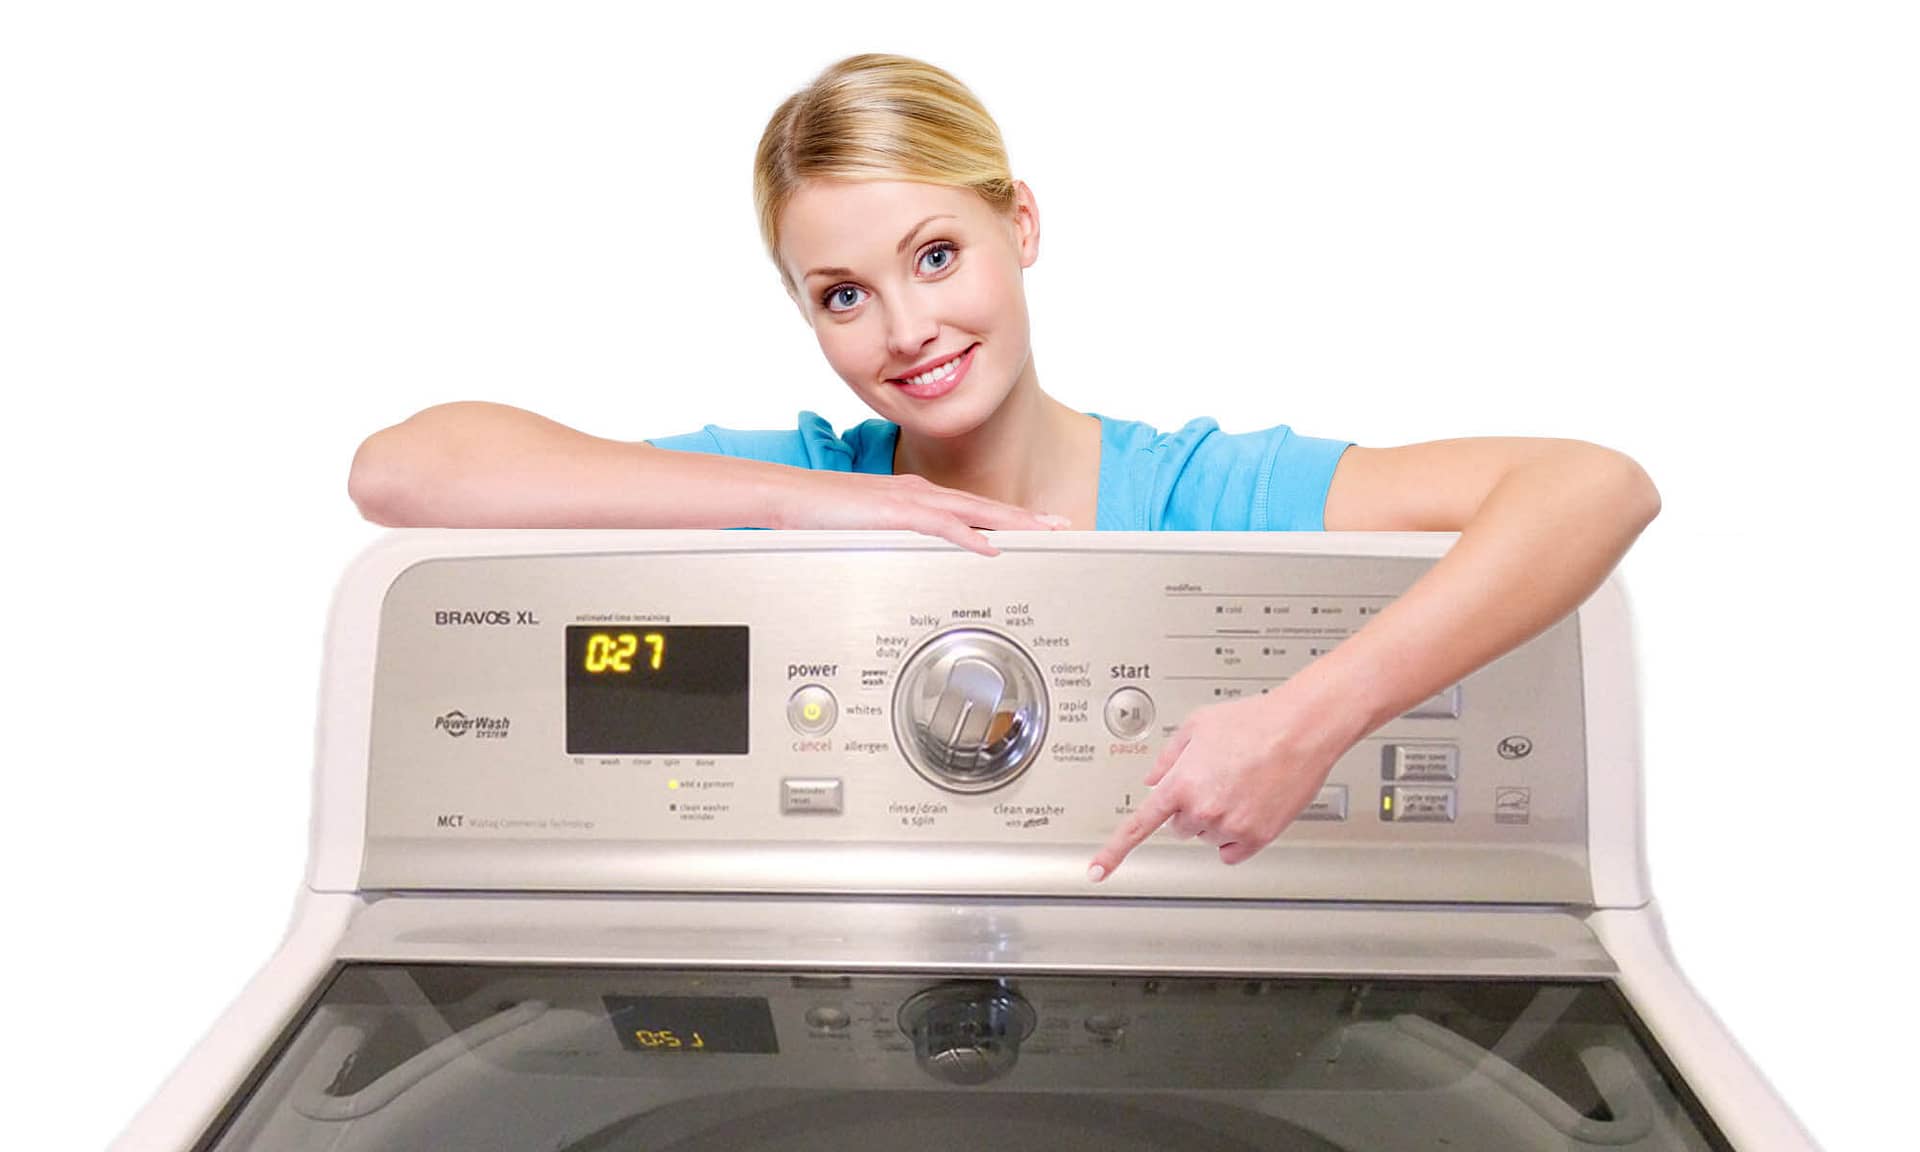 10 Most Common Maytag Bravos XL Washer Problems